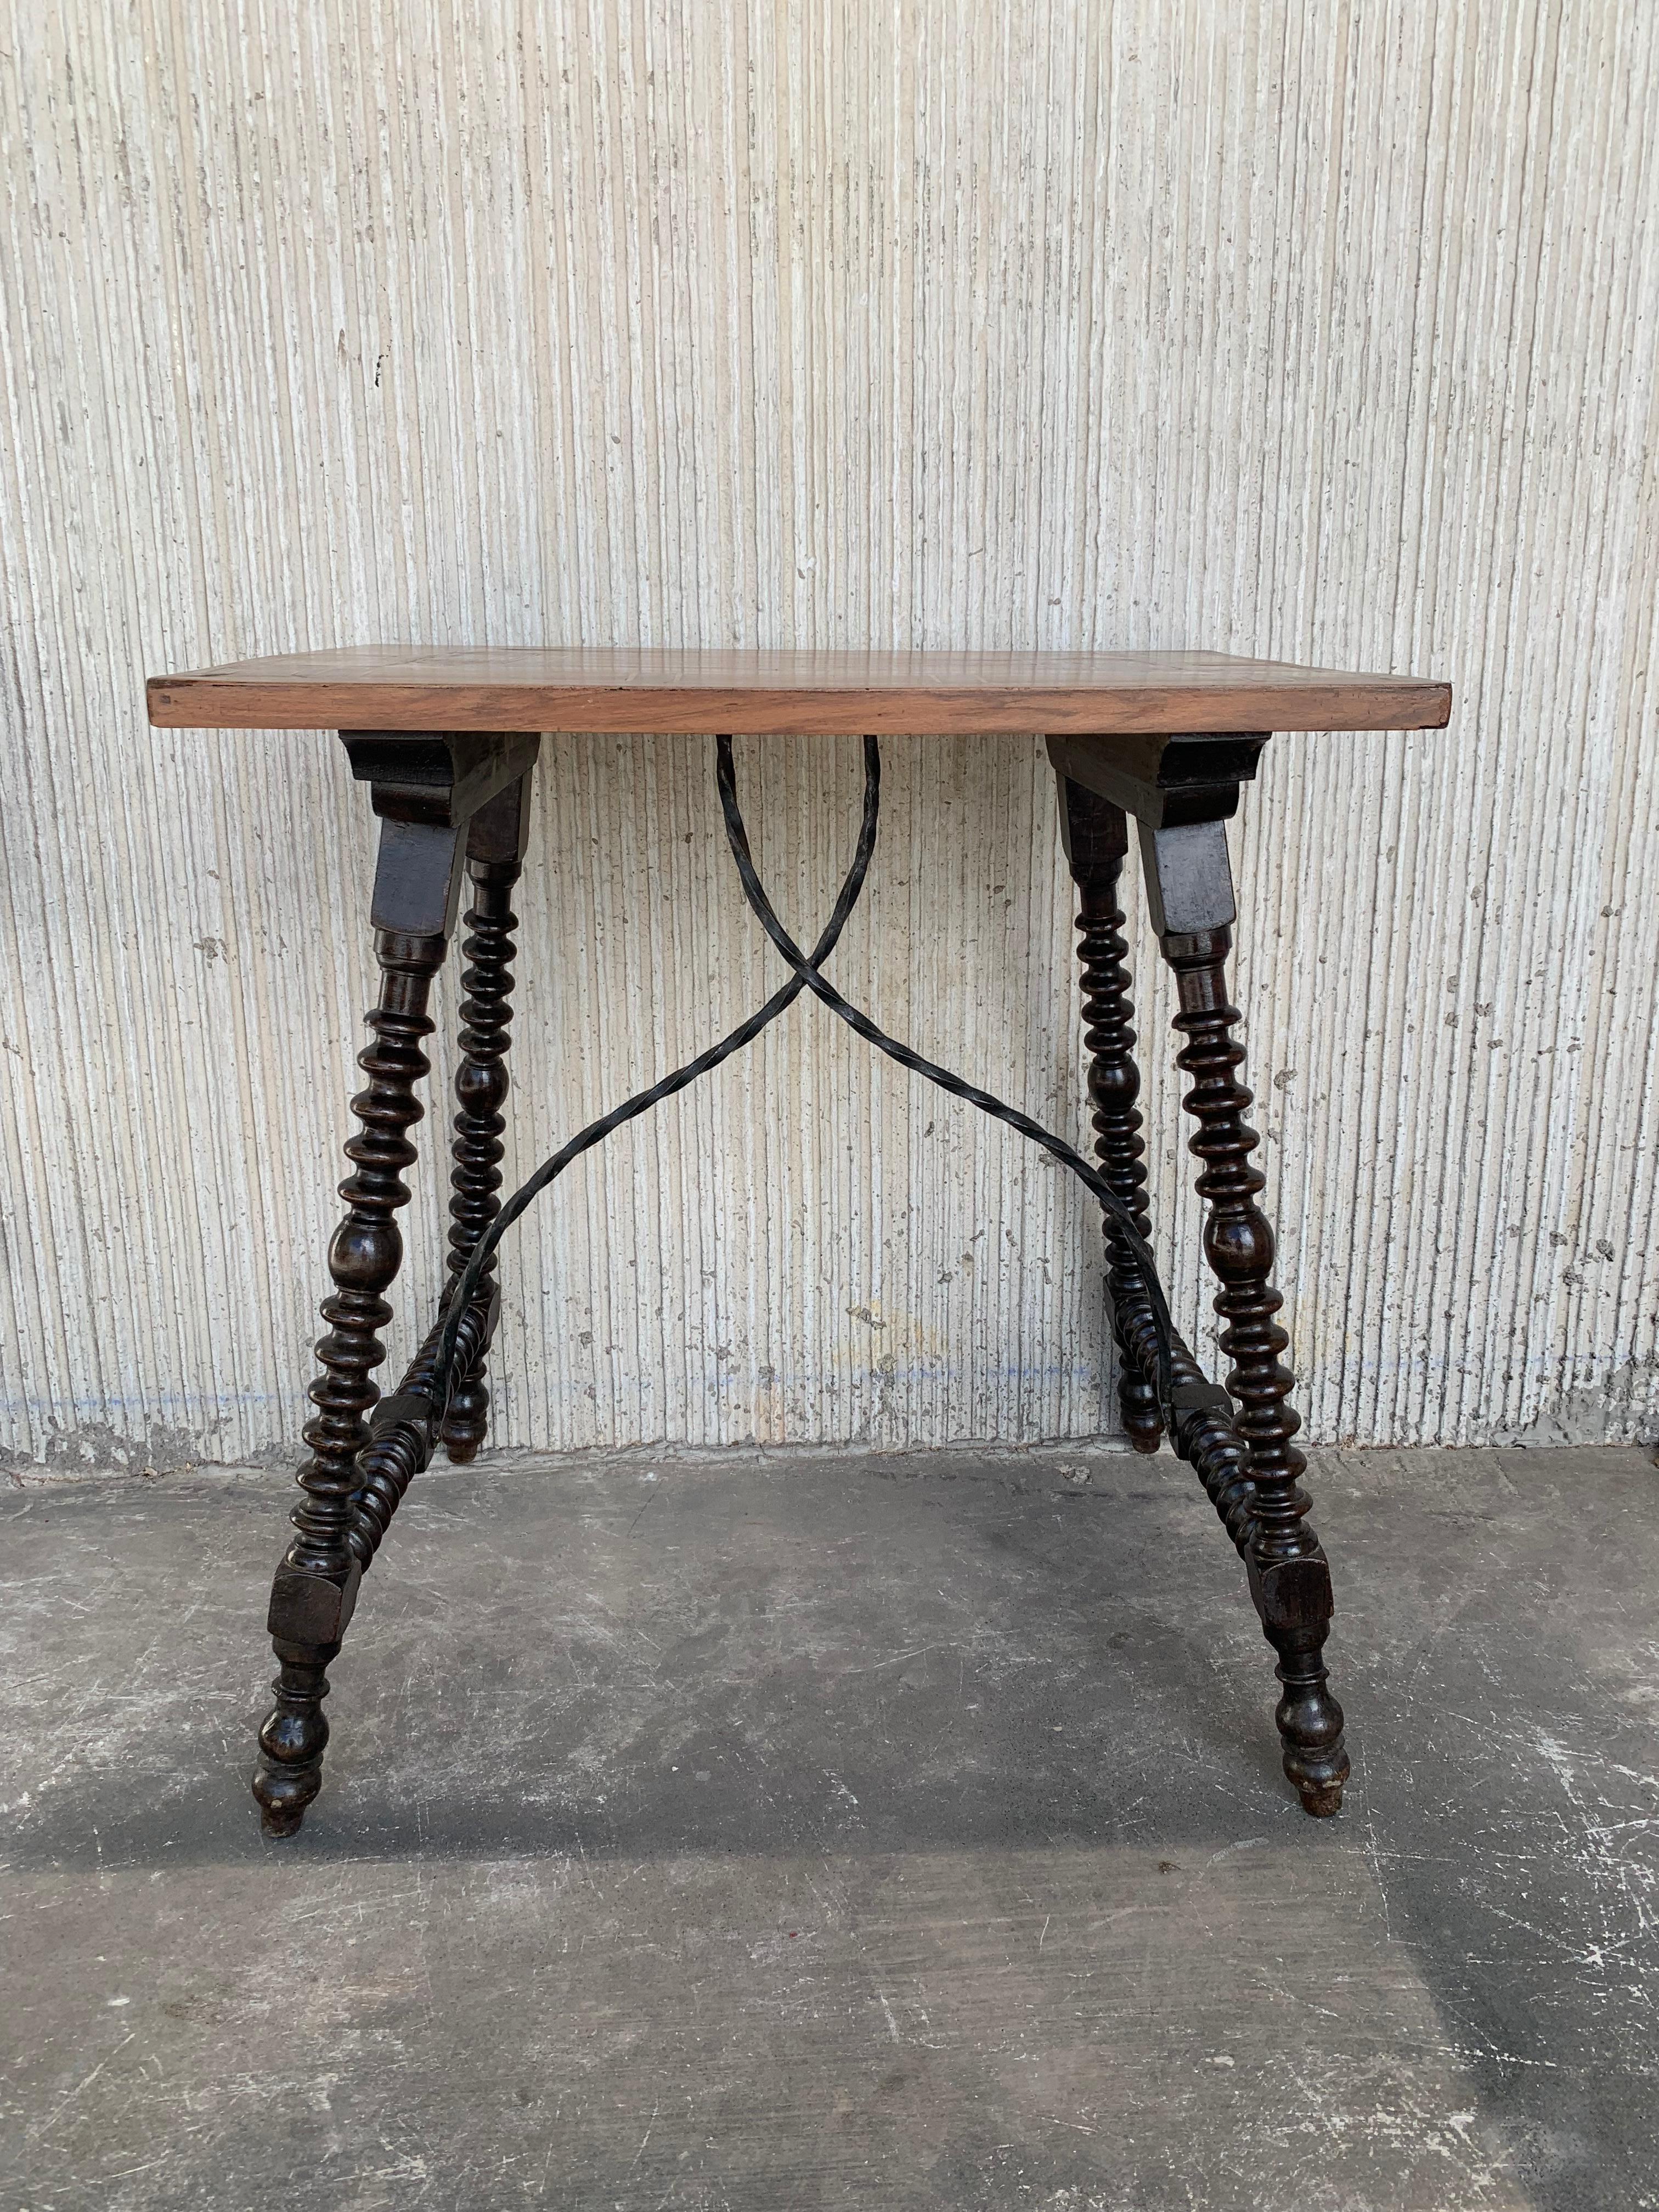 19th century Baroque Spanish side table with marquetry top

19th century Spanish trestle table in walnut. This piece has a great scale, lovely turned legs and beautiful marquetry top. . This table could be used as an end table, nightstand, side